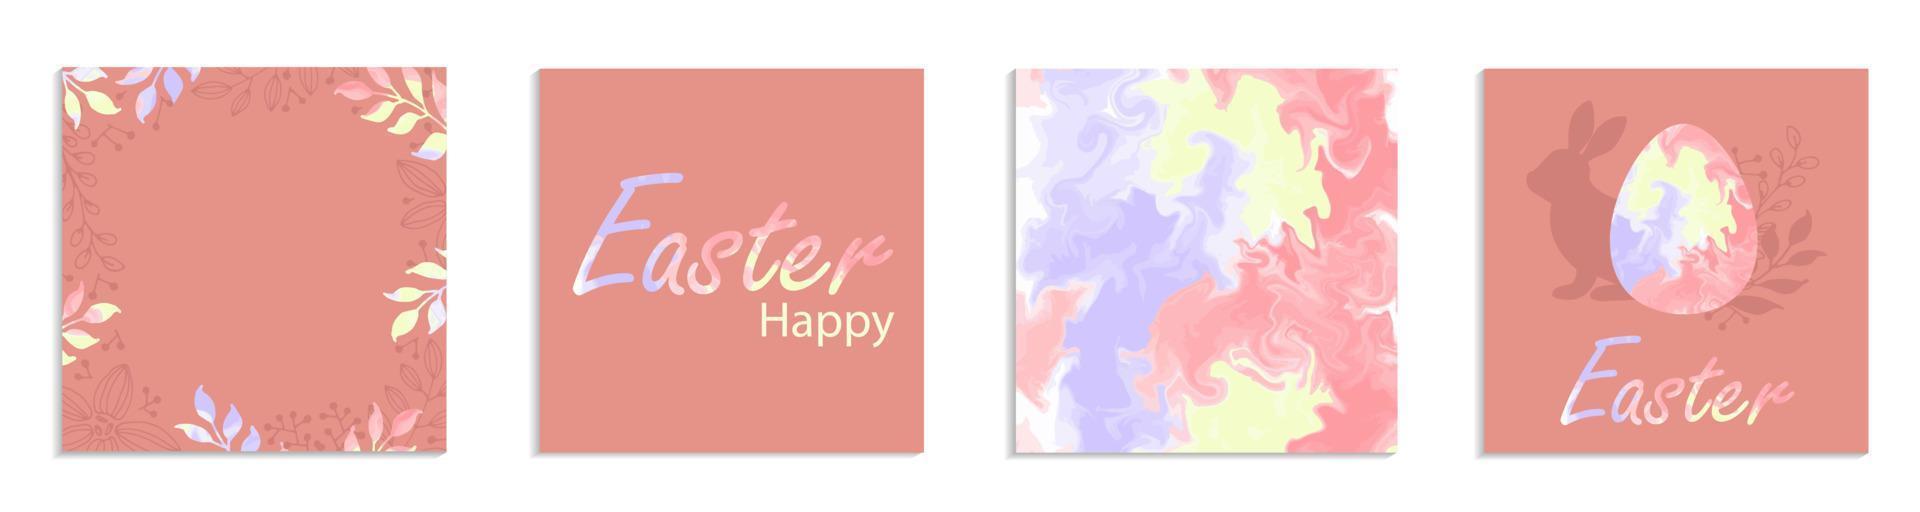 Square templates for social networks. Happy Easter banner. Floral patterns with the effect of liquid ink. Advertising holiday templates. Vector illustration.